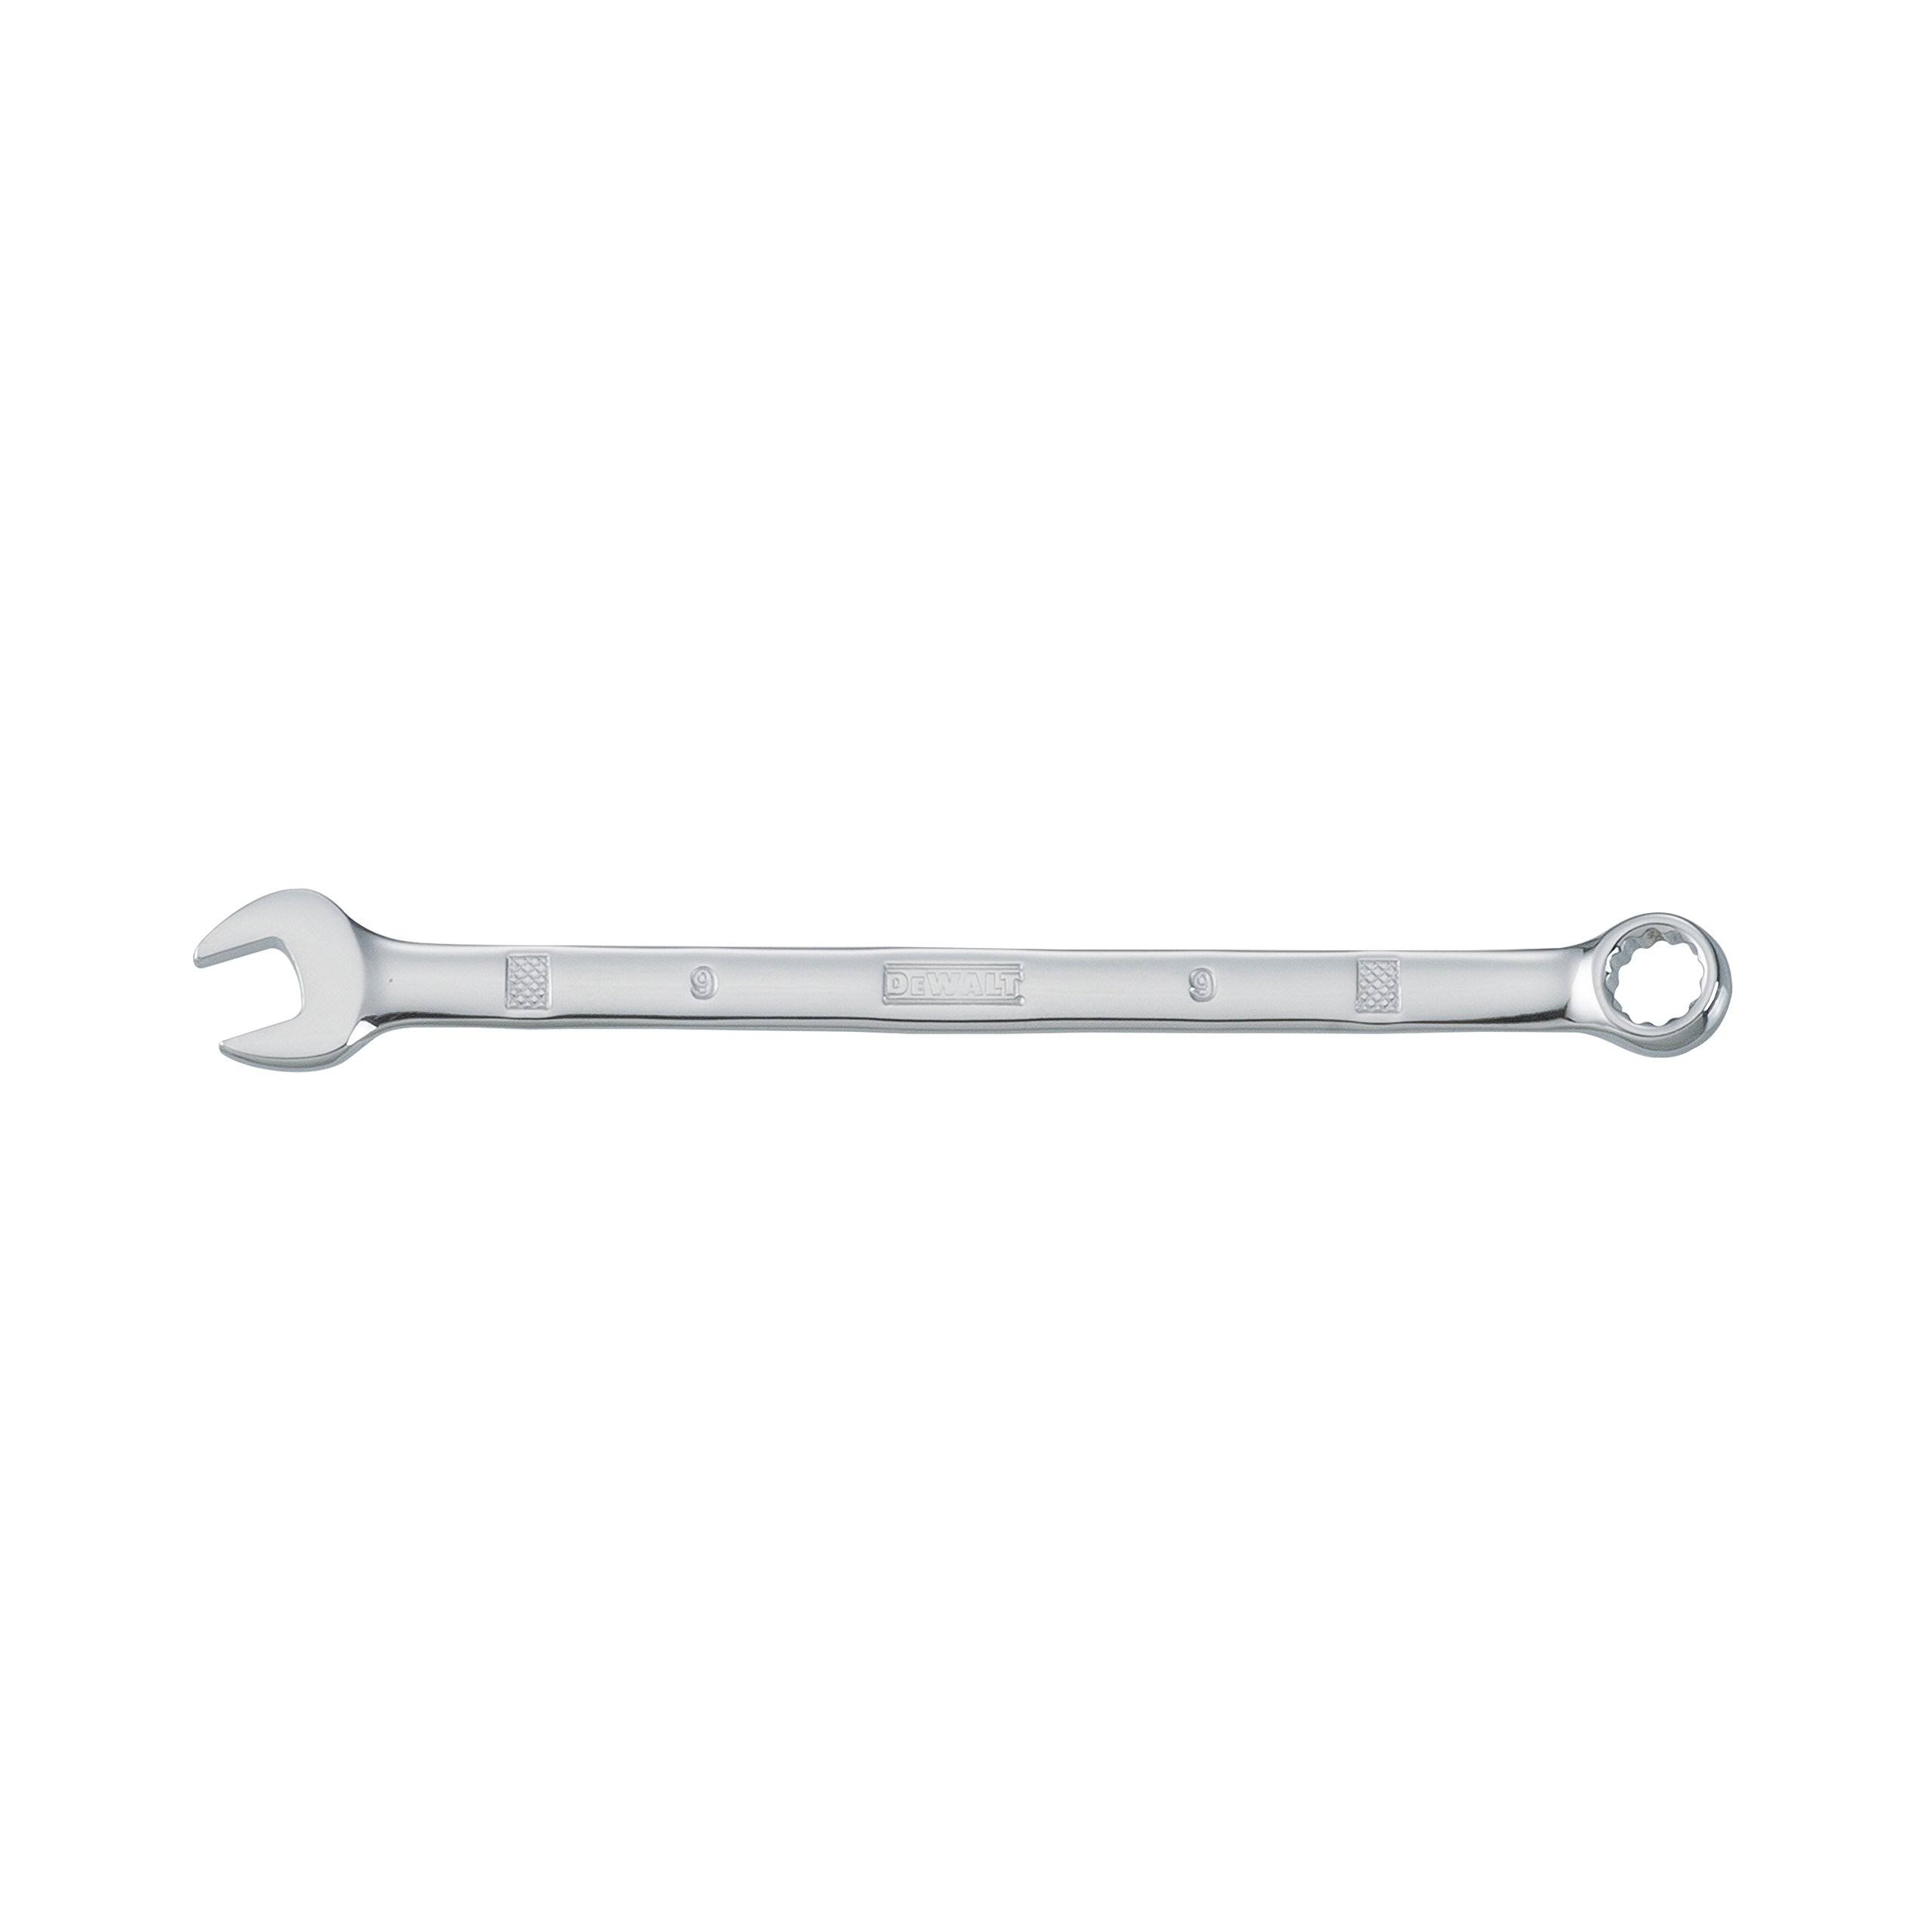 Stanley Tools 7517352 Wrench Combination - Anti-Slip, 9mm